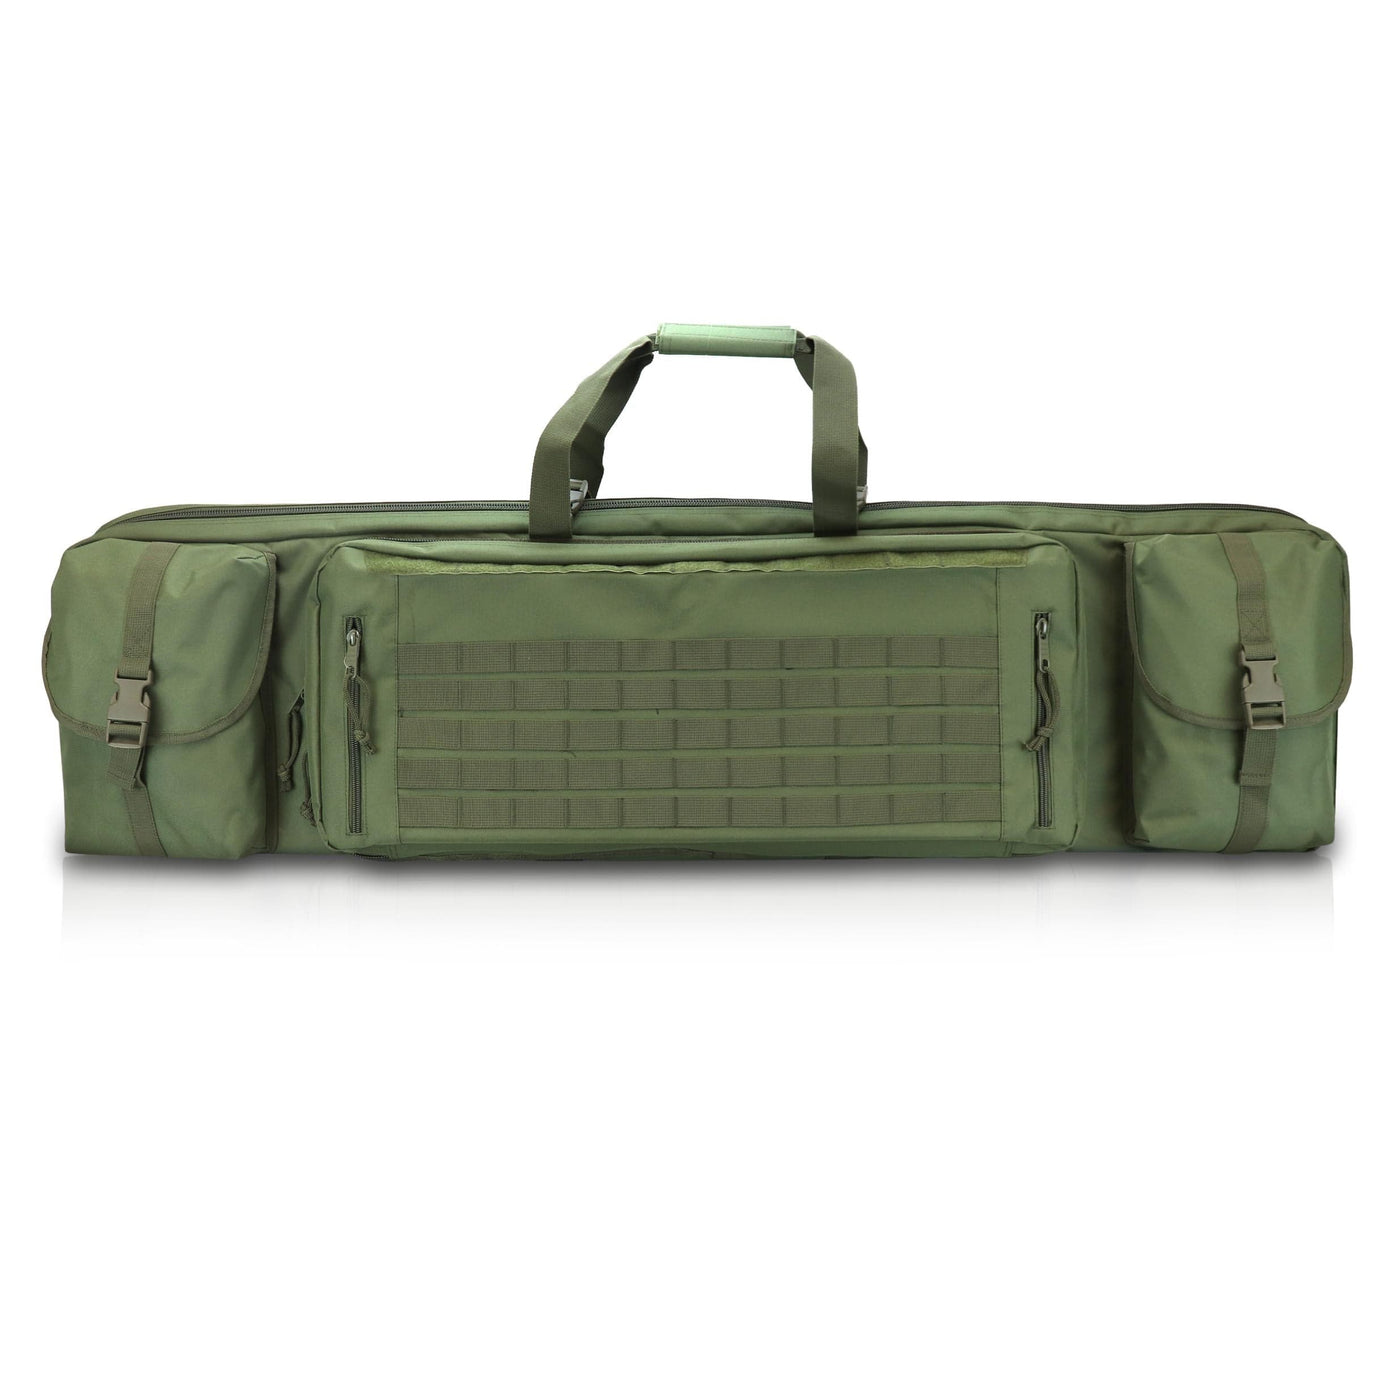 Osage River Osage River 51 in Double Rifle Case OD Green Shooting